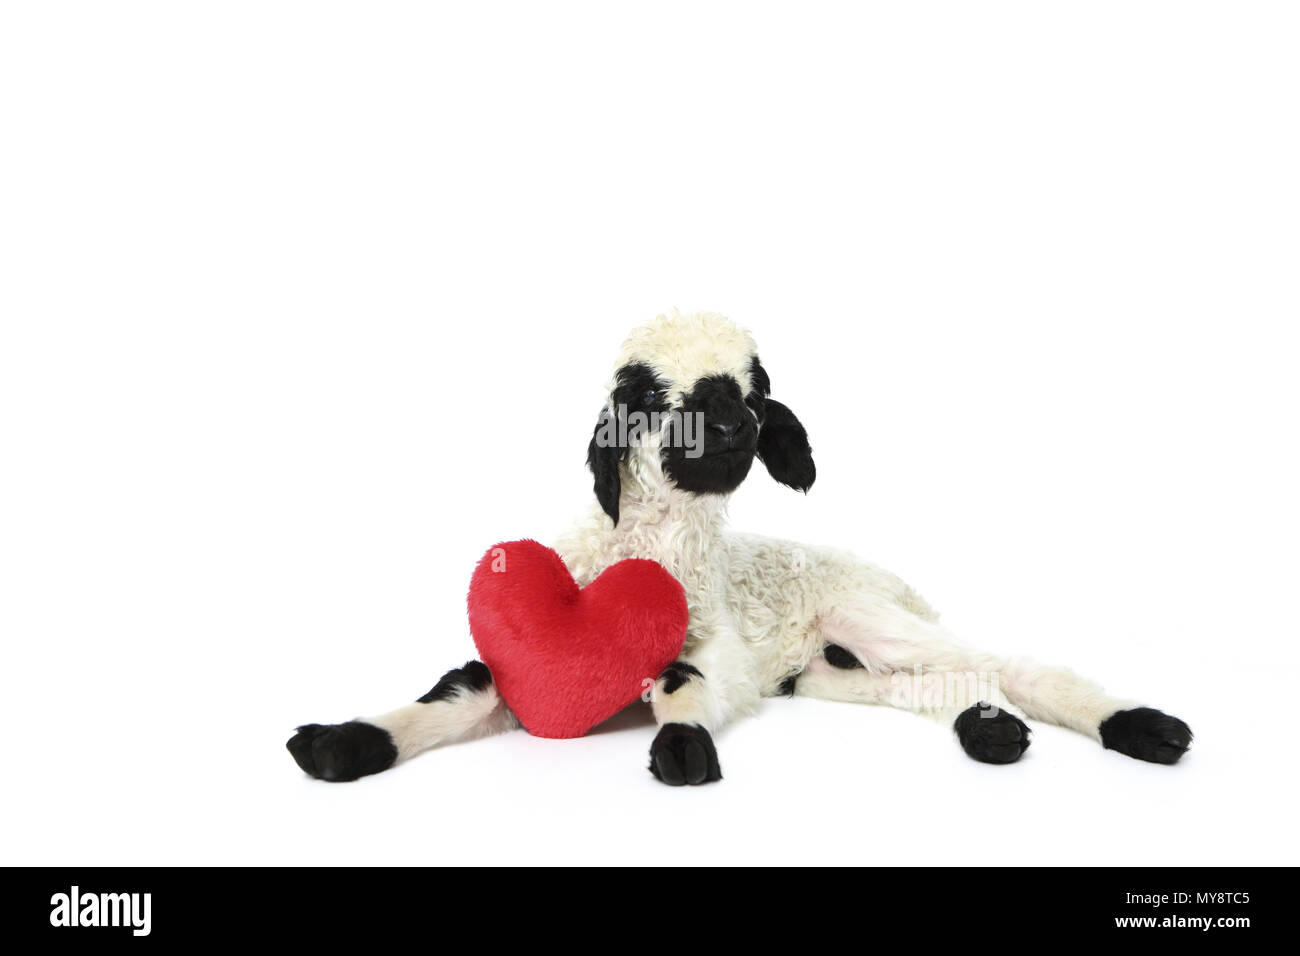 Valais Blacknose Sheep. Lamb (6 days old) lying next to a red plush heart. Studio picture against a pink background. Germany Stock Photo